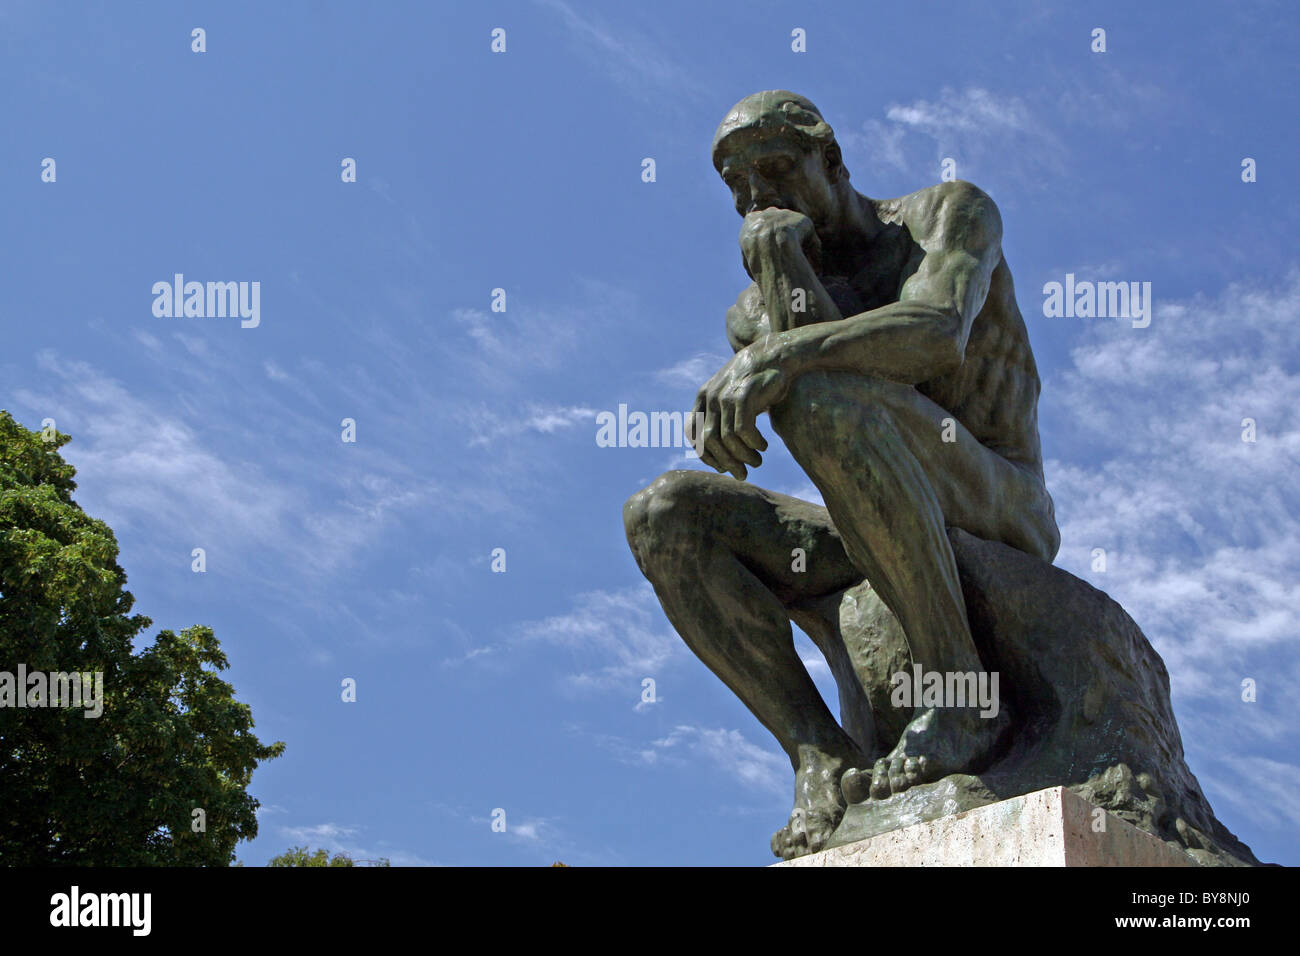 Sculpture of 'The Thinker' by Auguste Rodin (1840-1917) in the gardens of the Rodin Museum, Paris Stock Photo